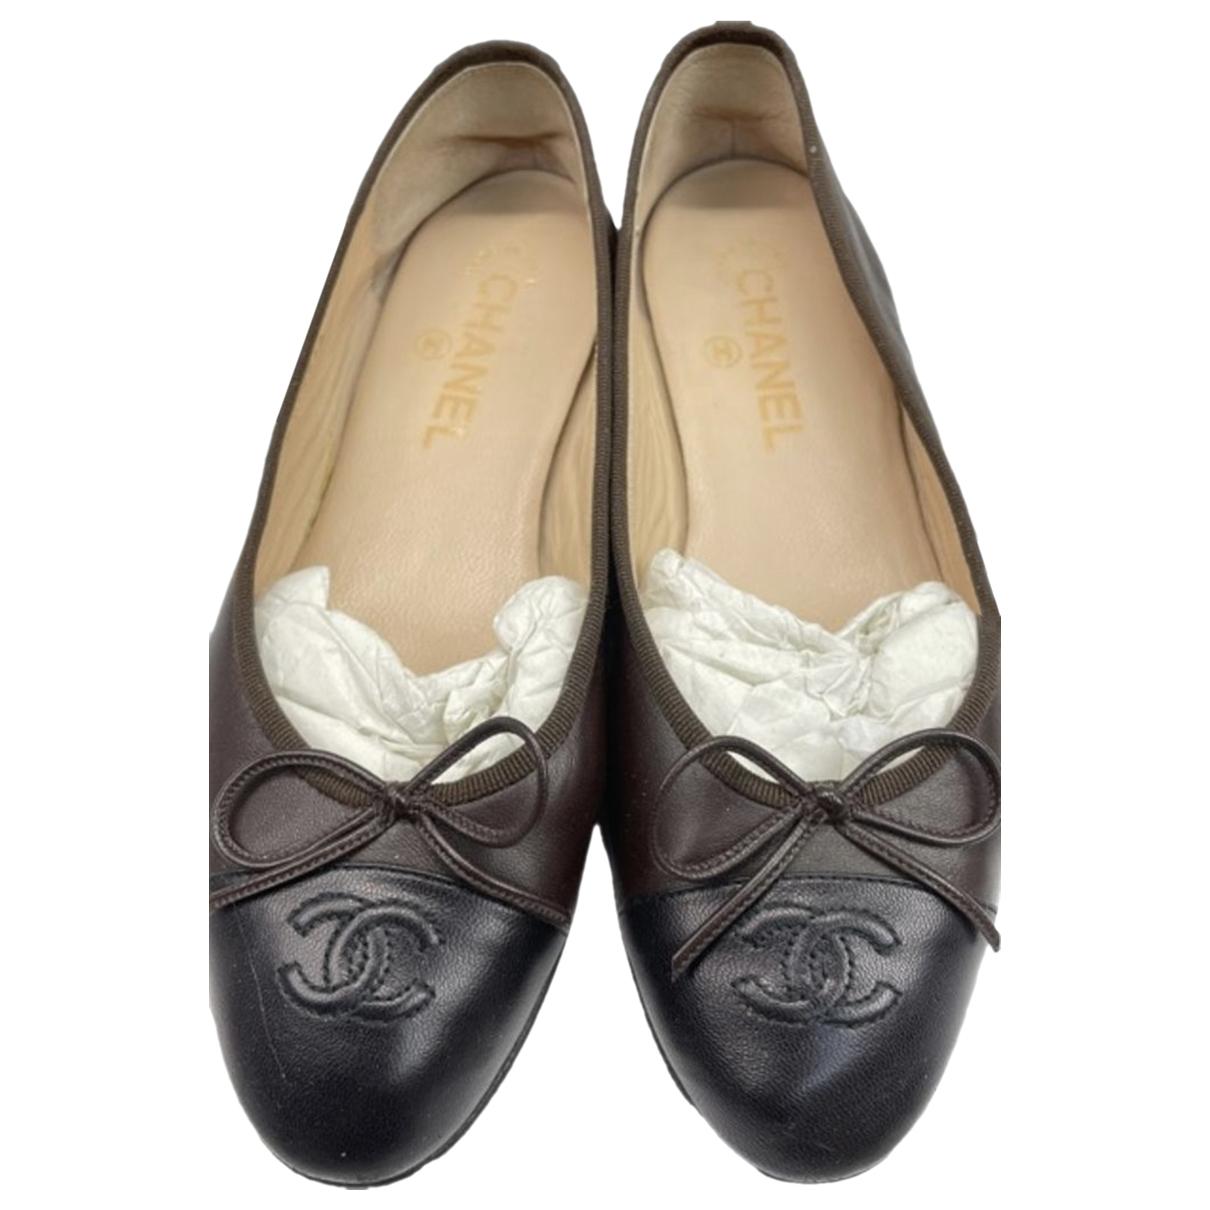 Chanel Quilted Leather Cambon Ballet Flats - Size 7 / 37 (SHF